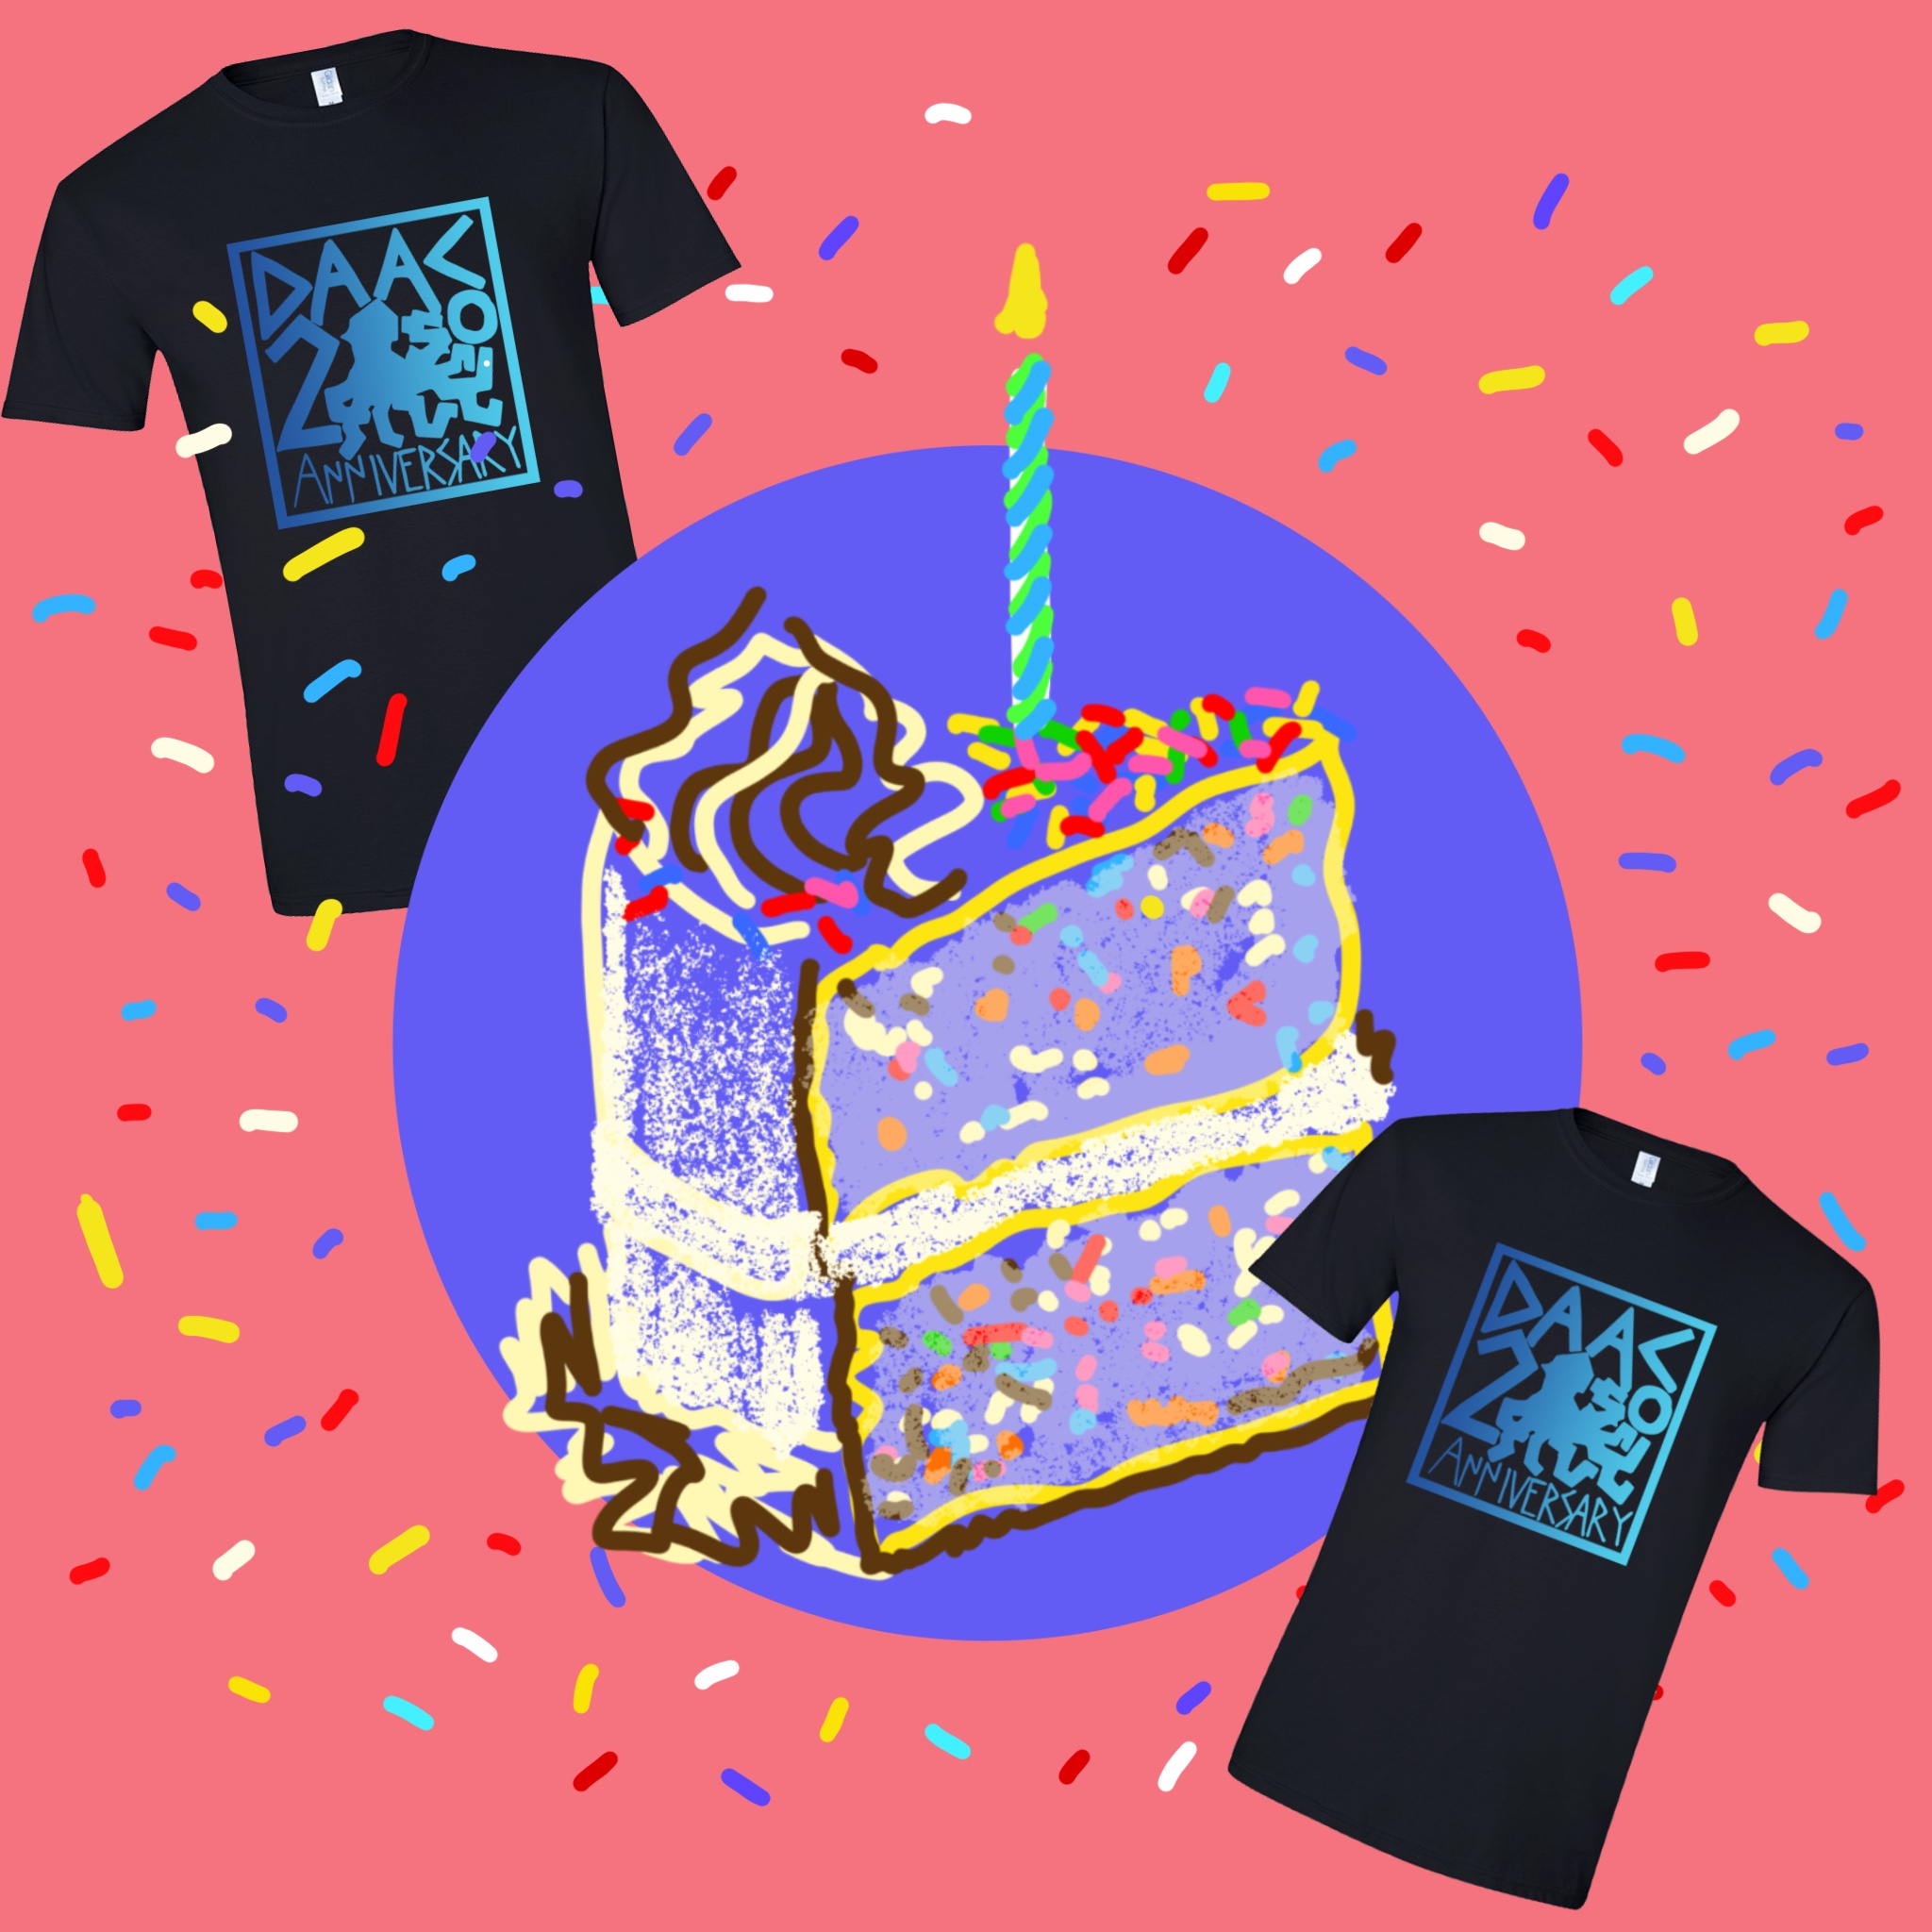 Digital illustration of a slice of birthday cake with a candle, and two black t-shirts with a teal and blue graphic